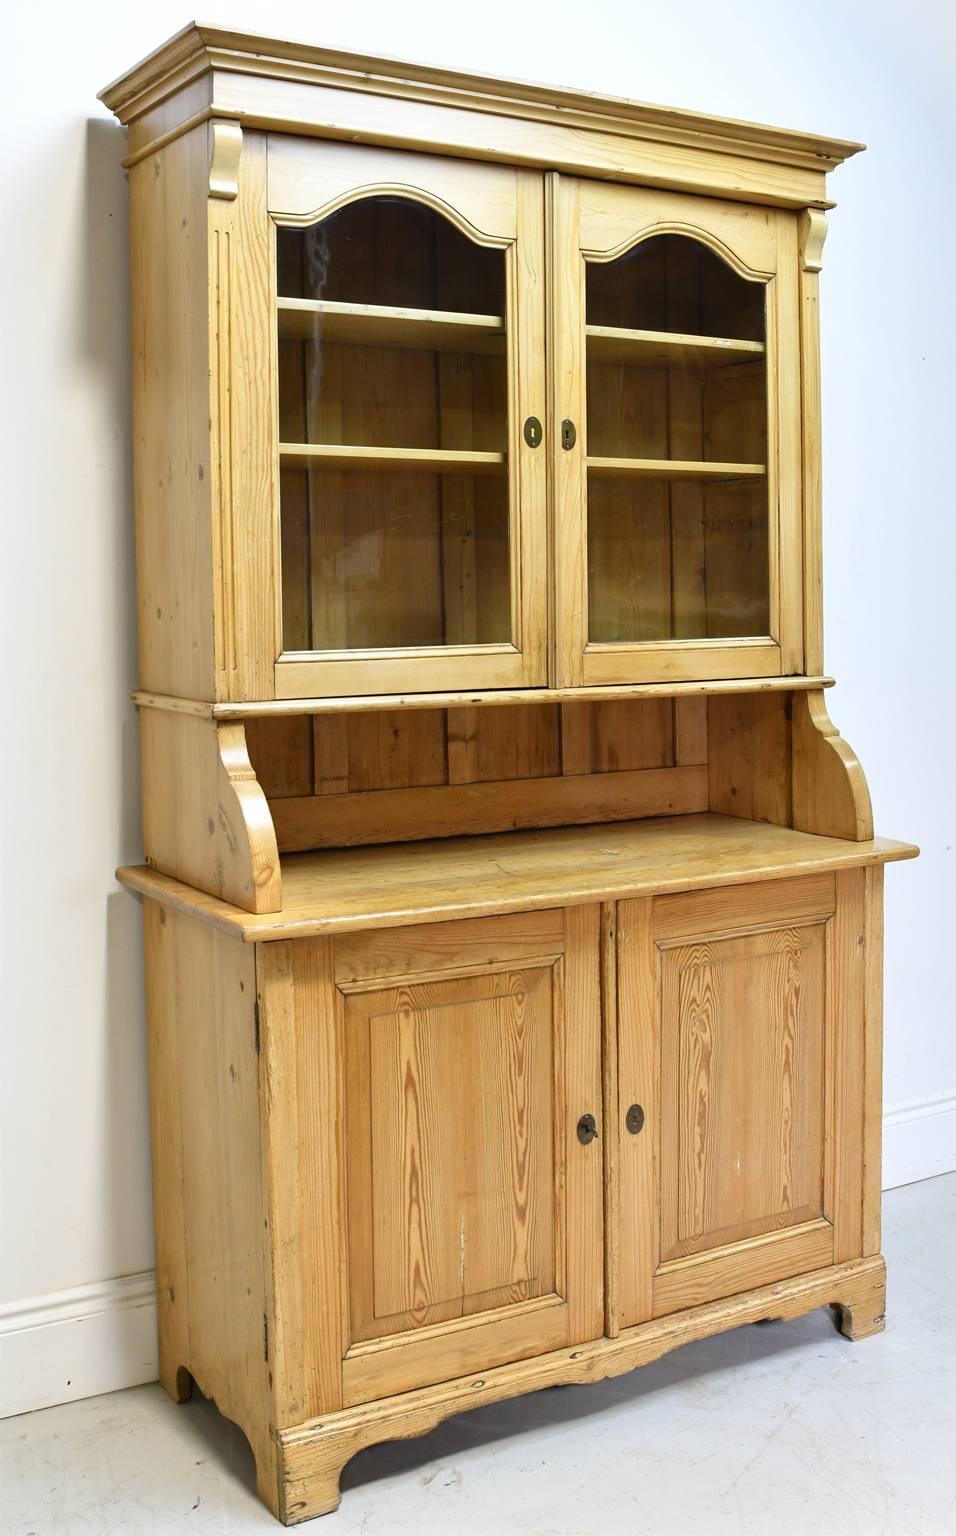 Country North German Pine Hutch with a Flight of Interior Drawers and Original Glass